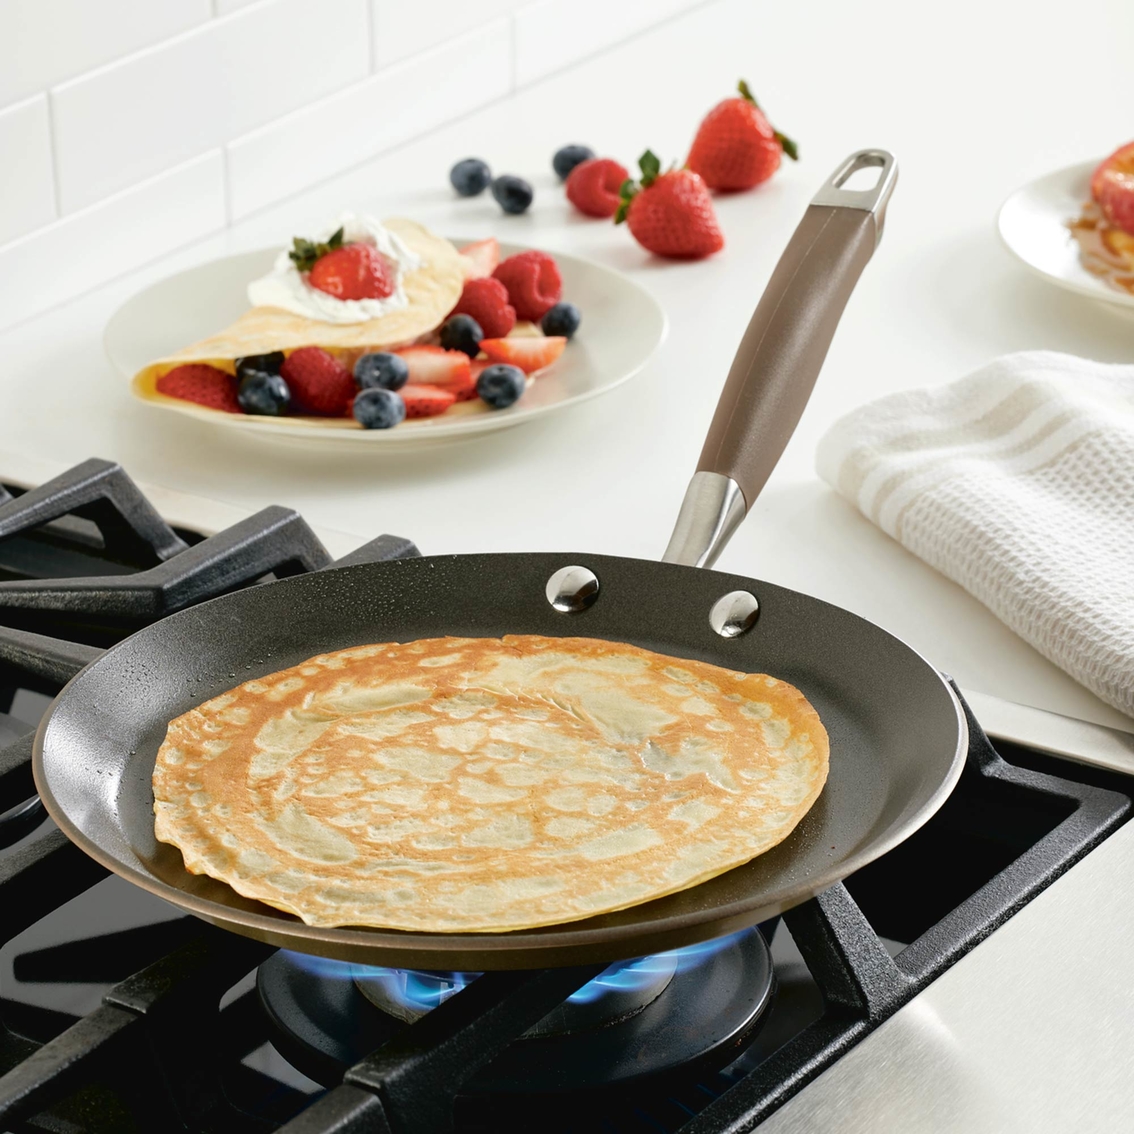 Anolon Advanced Home 9.5 in. Hard Anodized Nonstick Crepe Pan - Image 3 of 3